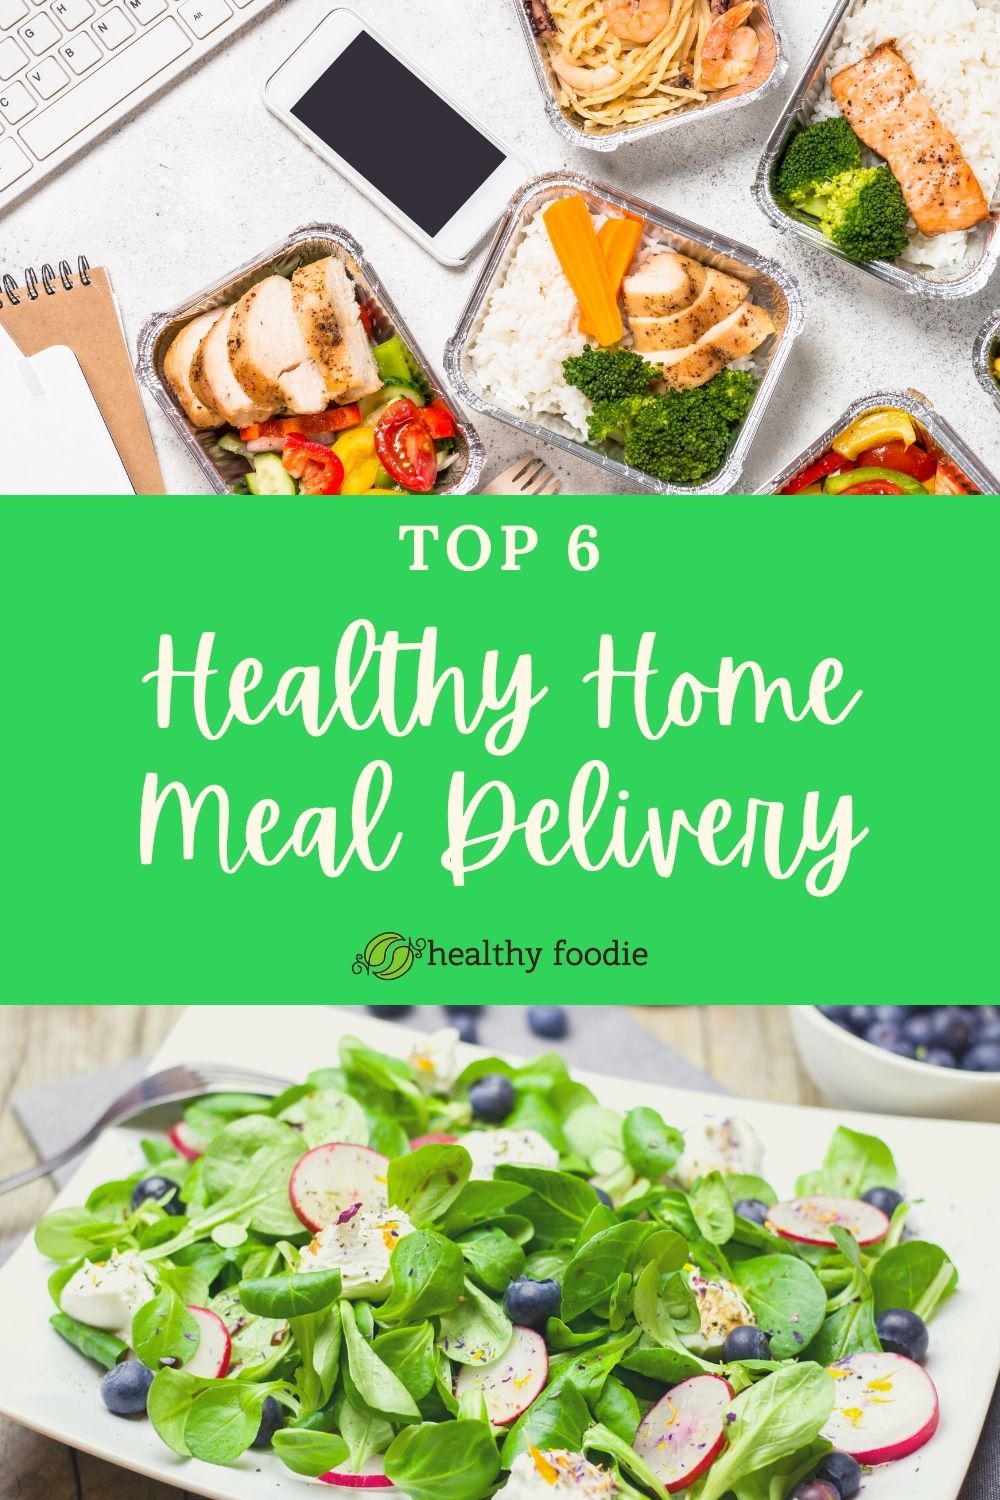 Healthy Home Meal Delivery